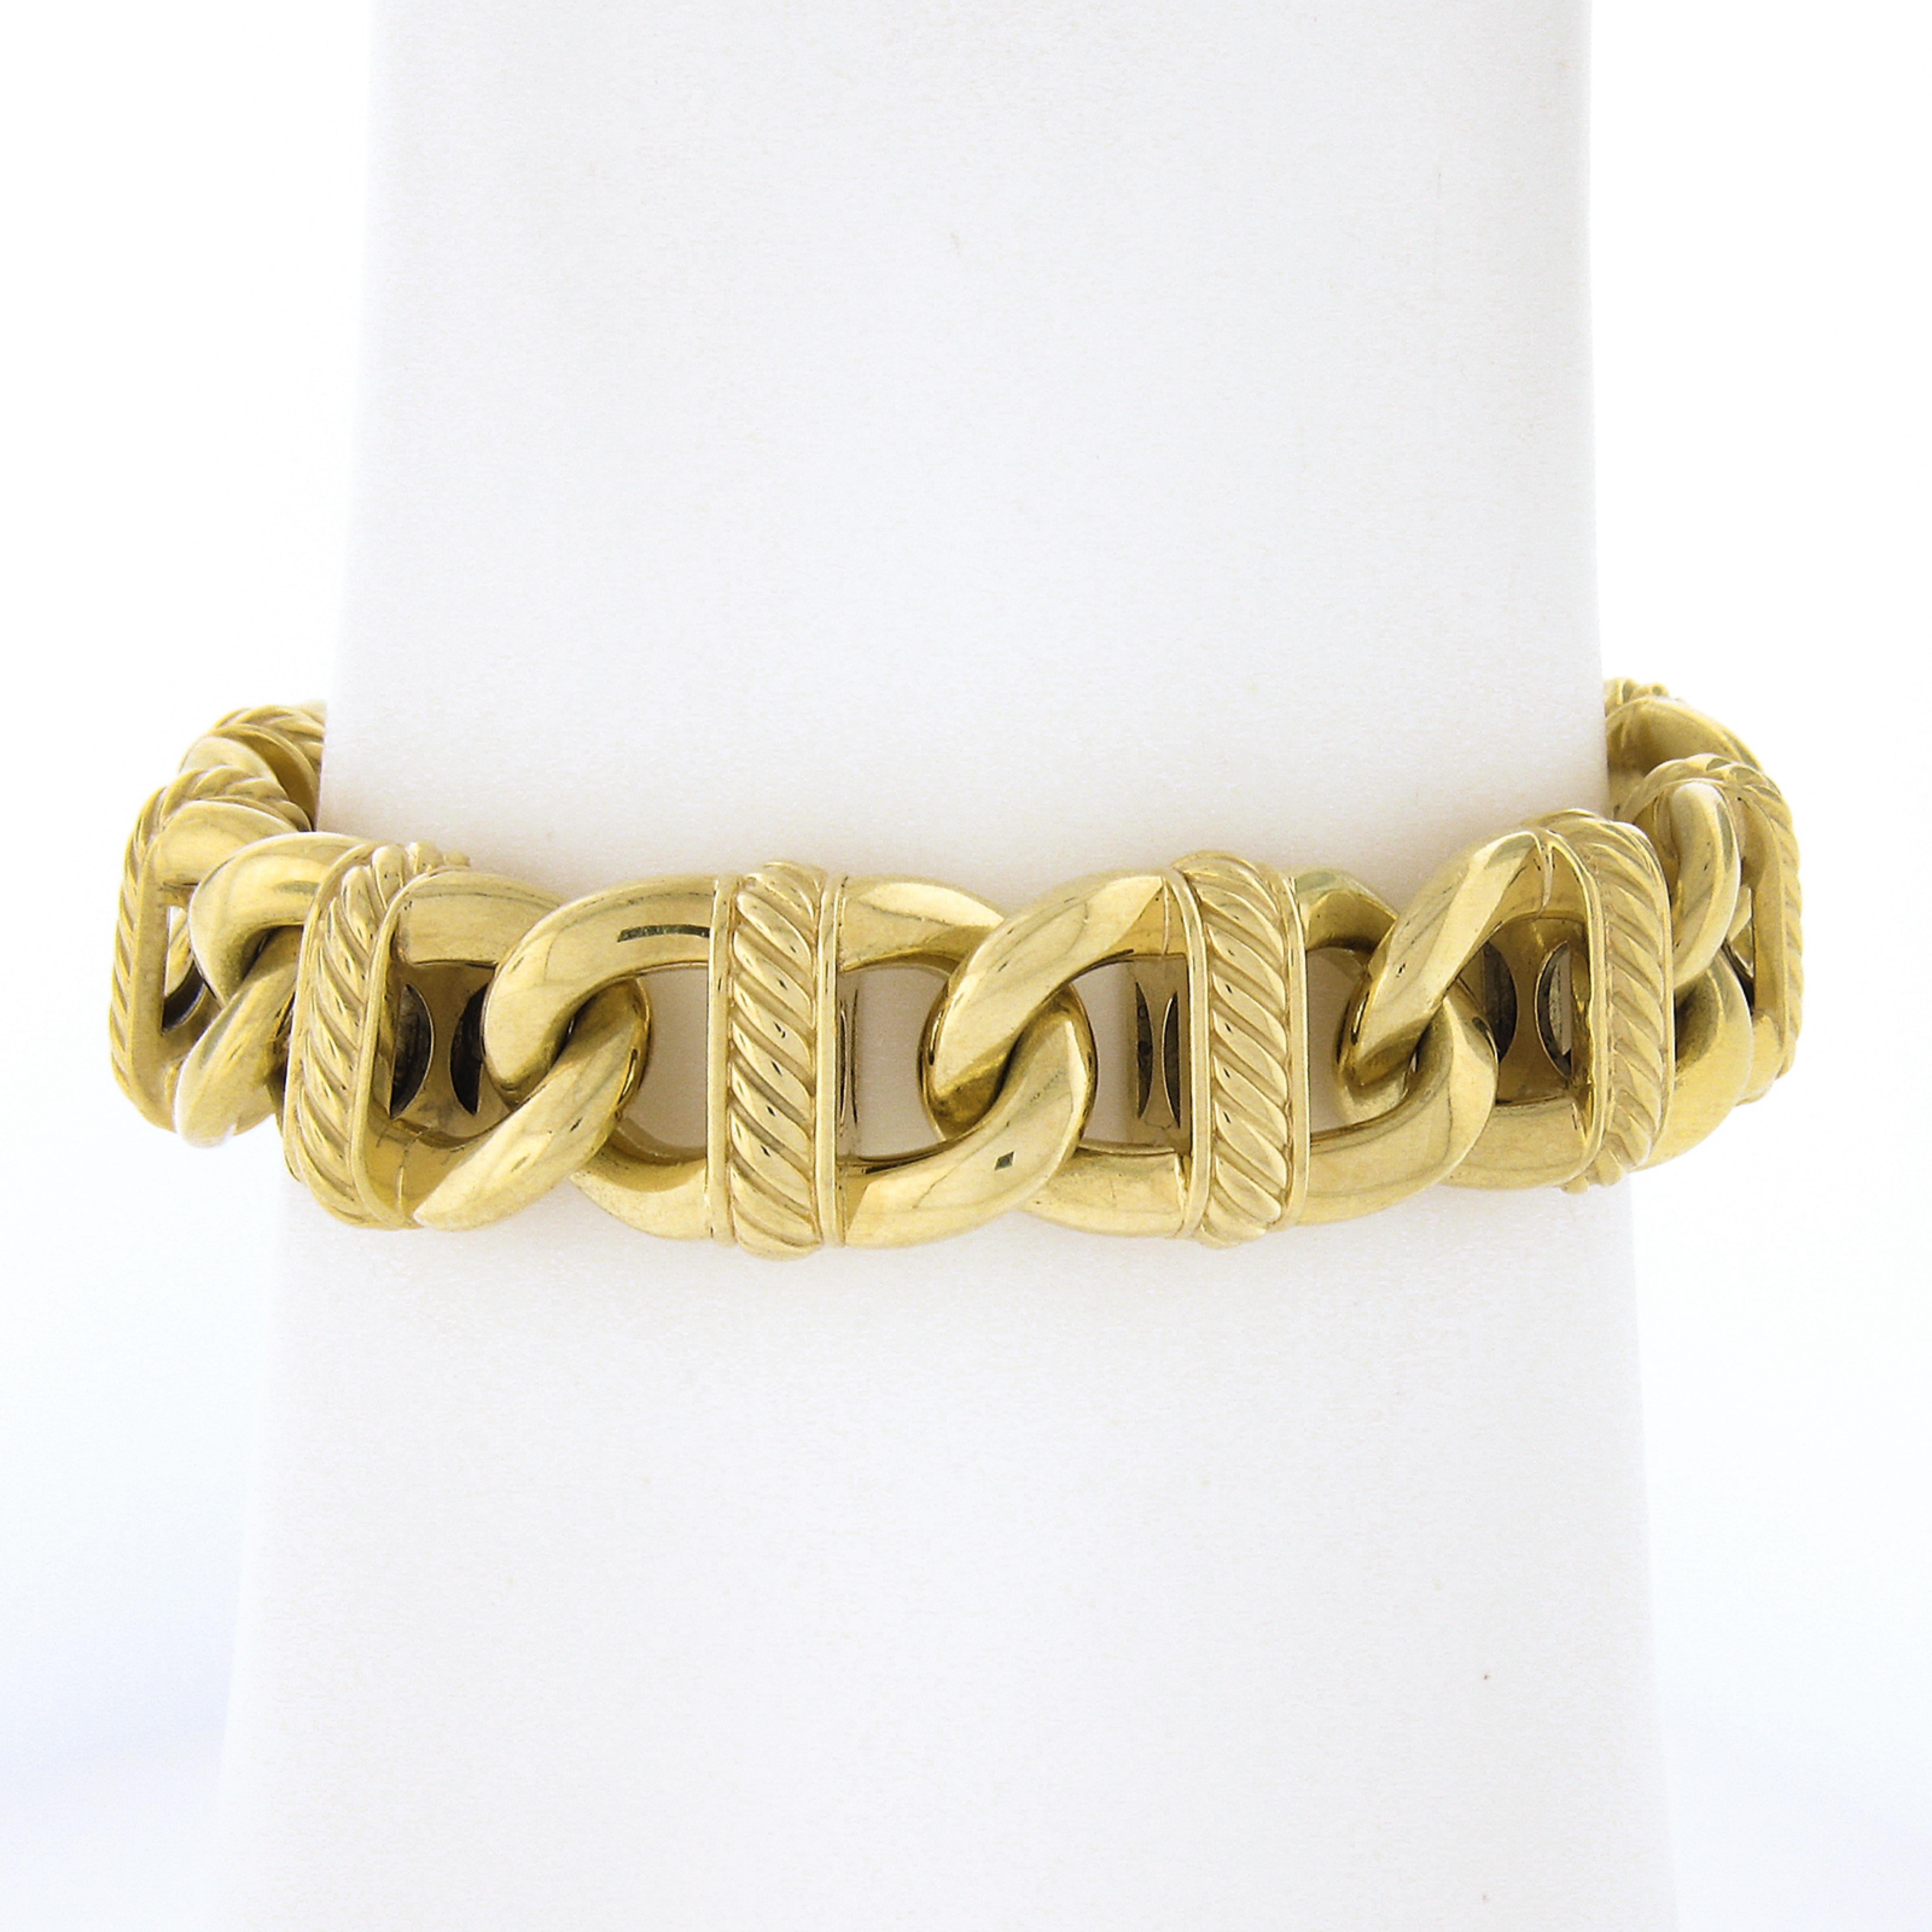 You are looking at a gorgeous unisex wide heavy bracelet by David Yurman crafted in solid 18k yellow gold and features an open cable link with twisted wire design at the middle of each link. This bracelet have a nice bold appearance that looks